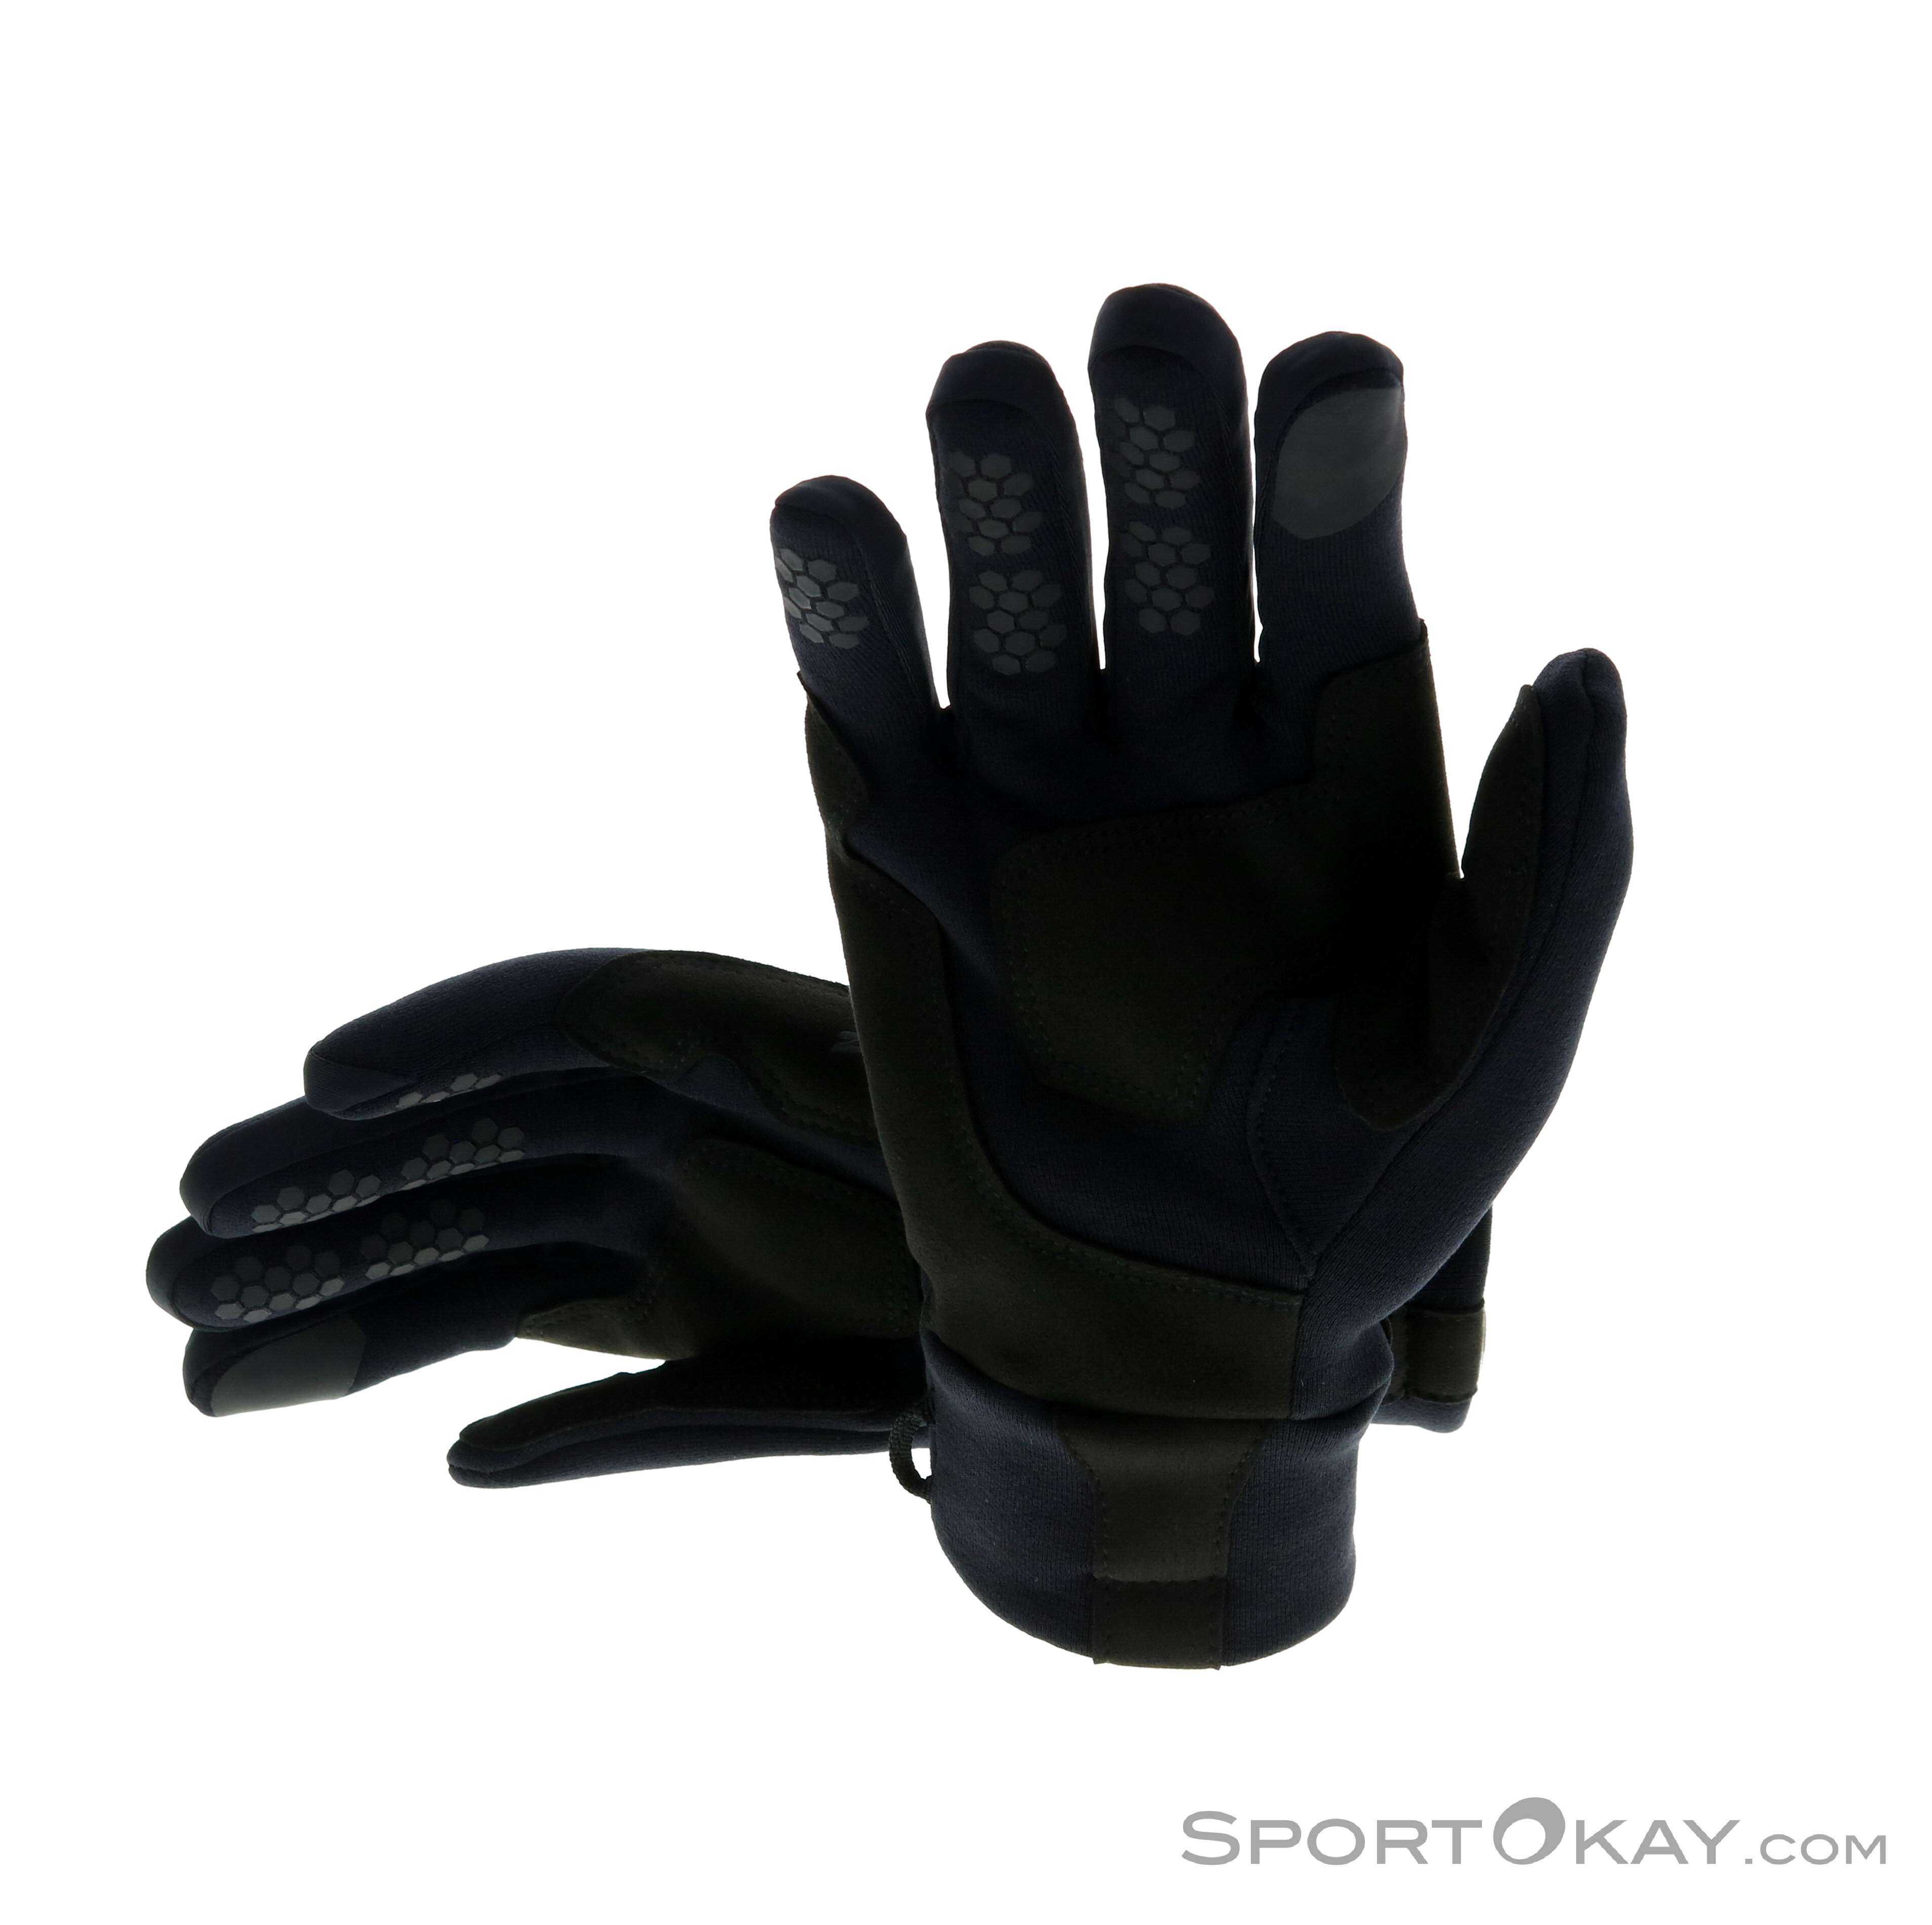 All Gusty - - - Clothing Outdoor Gloves Gloves - Outdoor Touch Ziener